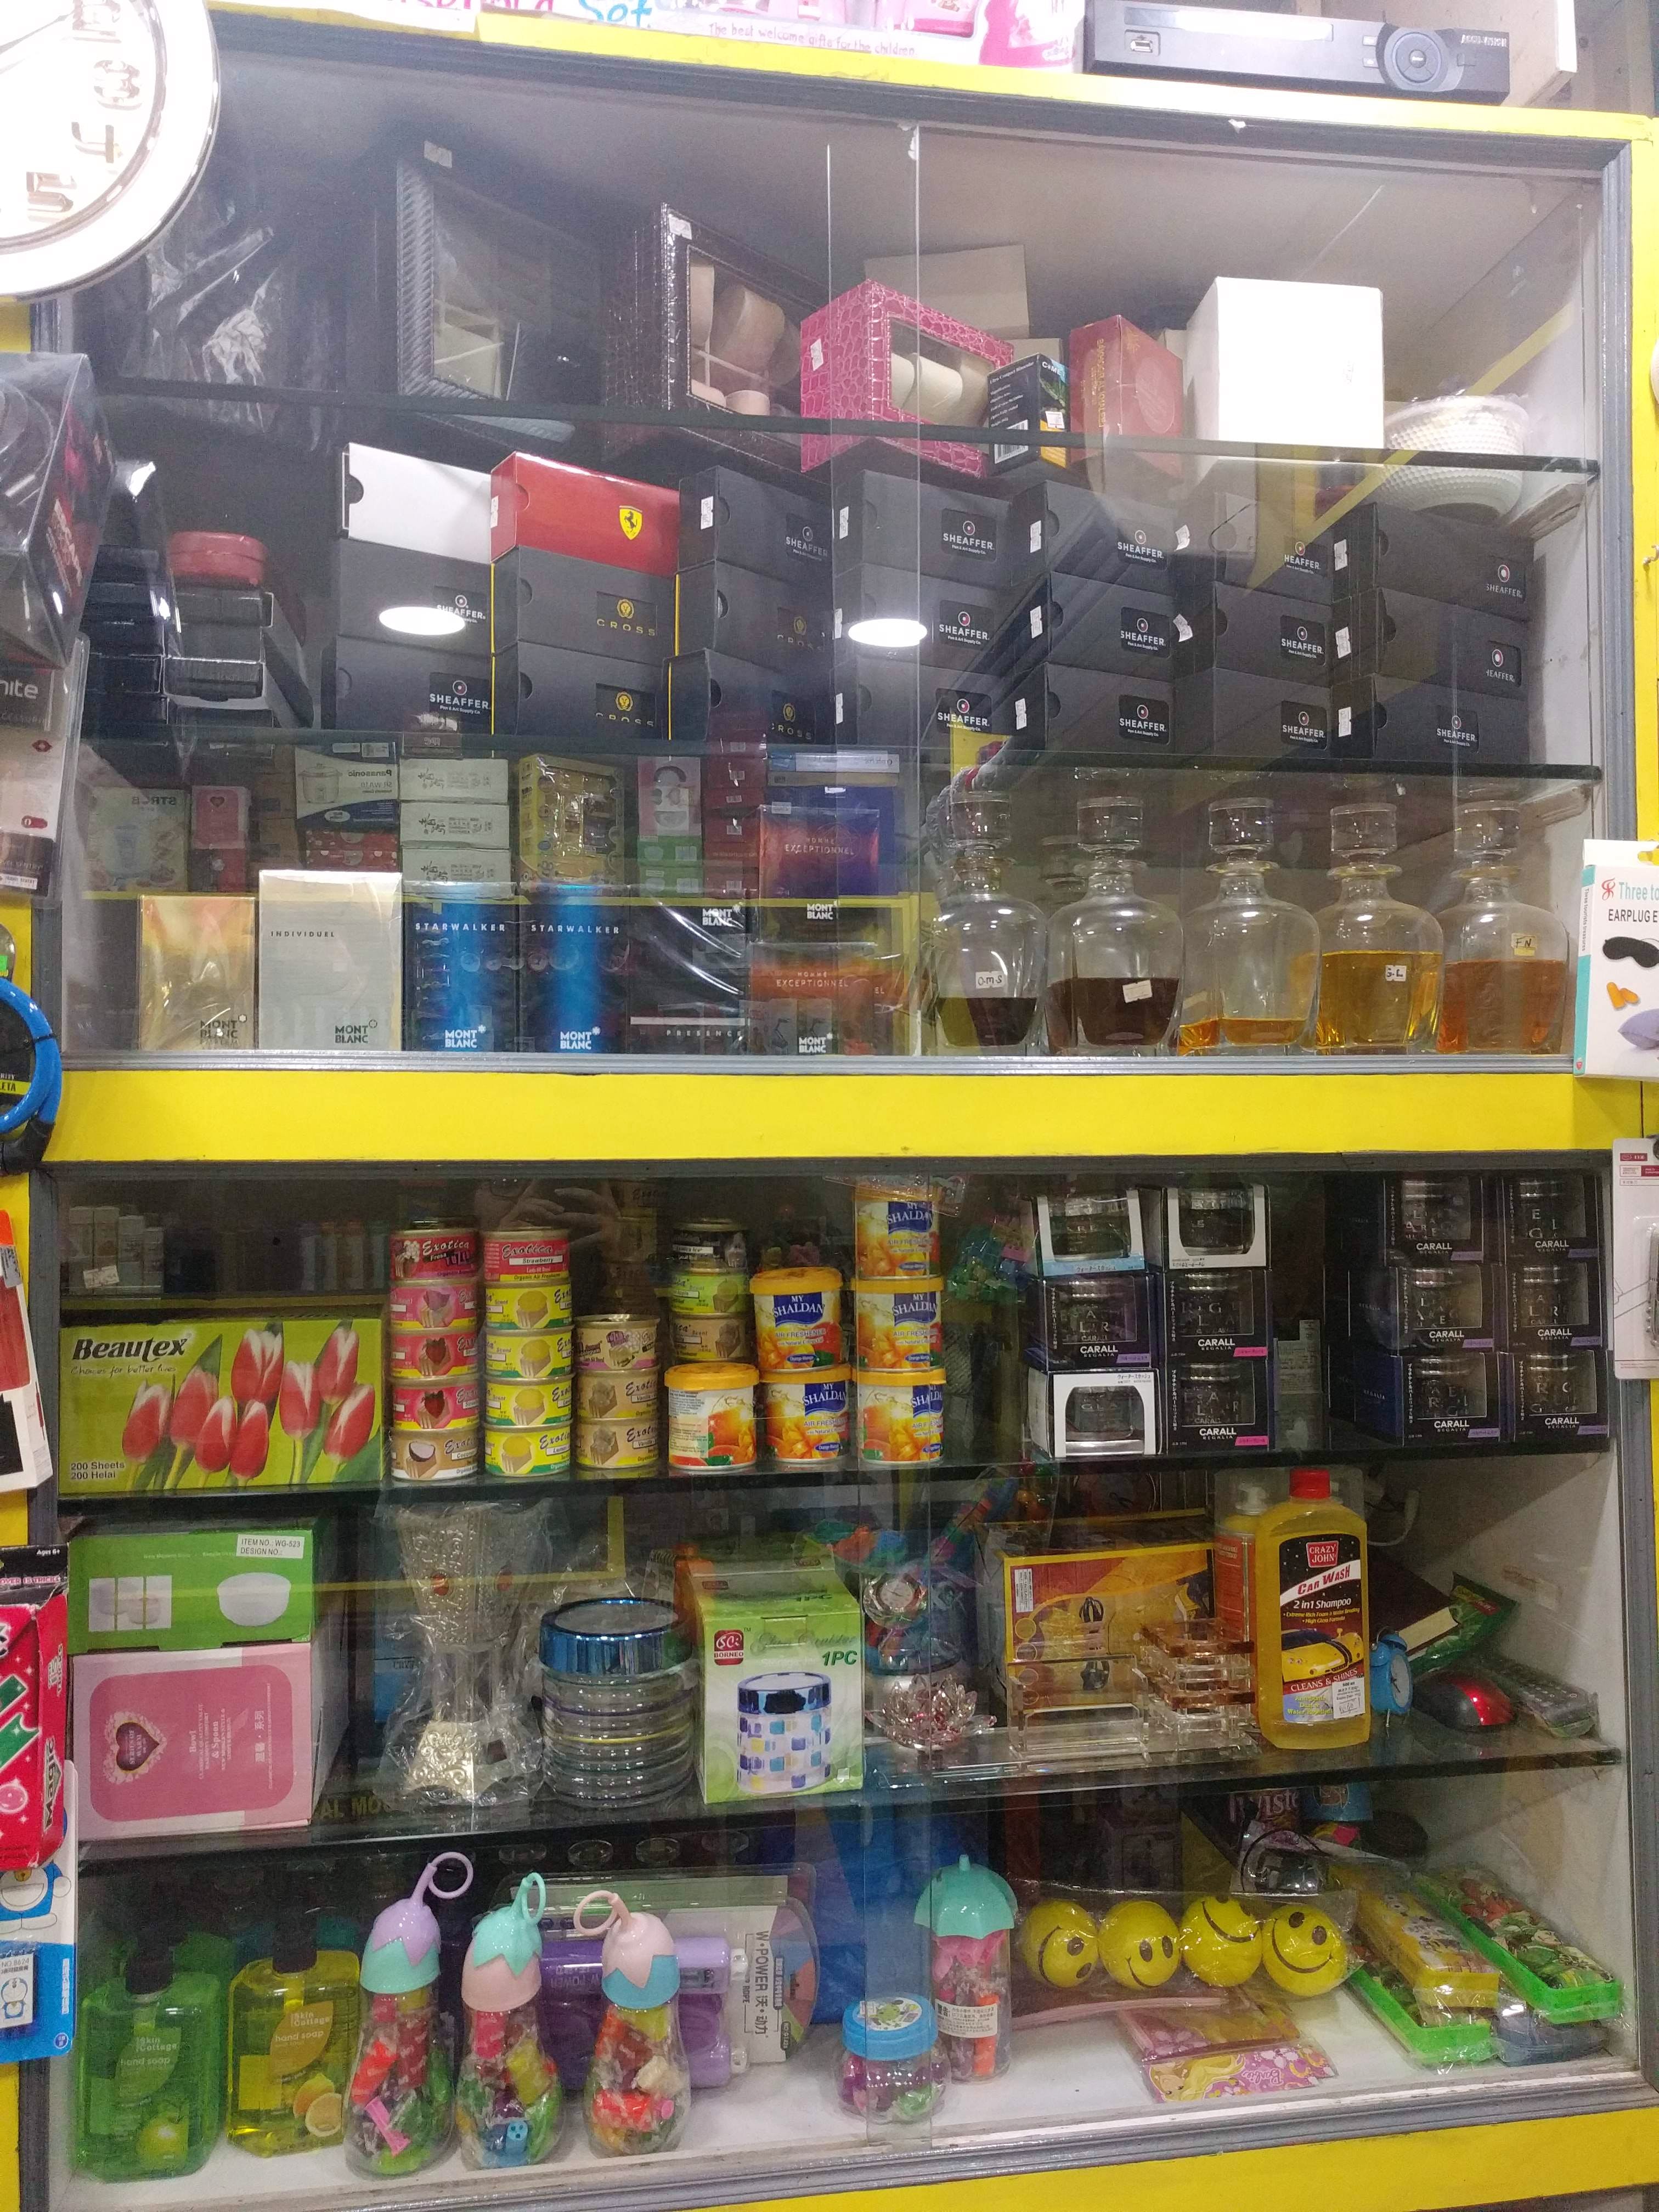 Display case,Toy,Plastic,Grocery store,Retail,Shelf,Convenience store,Collection